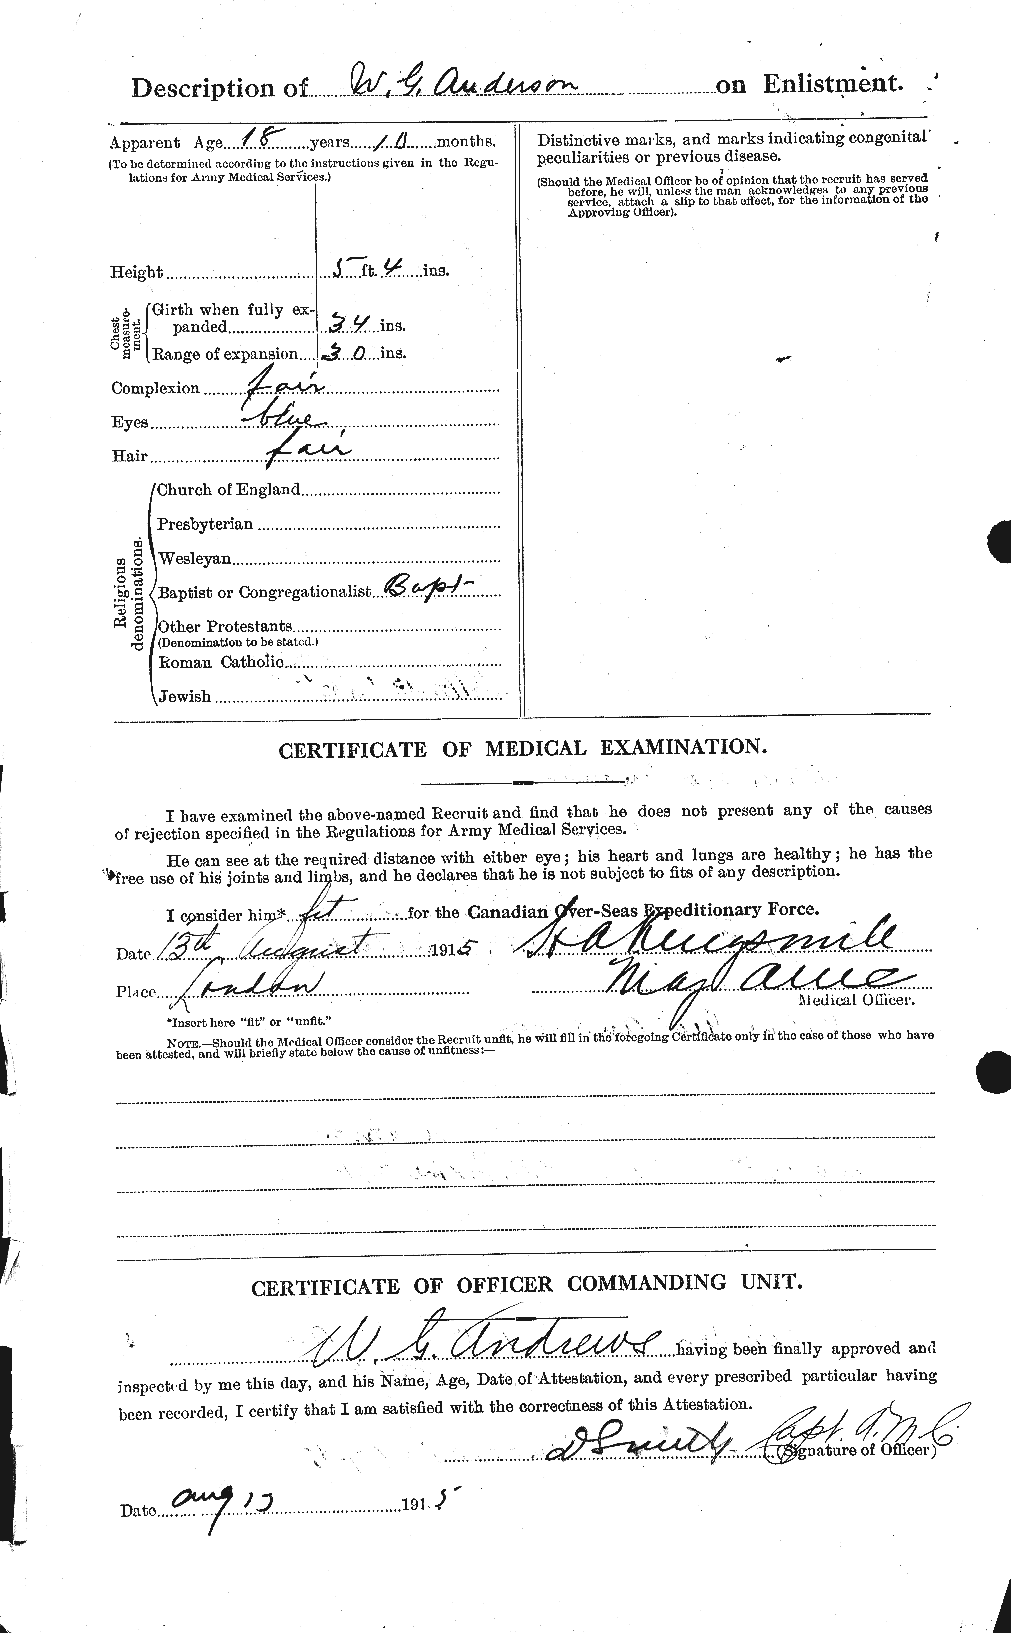 Personnel Records of the First World War - CEF 210853b